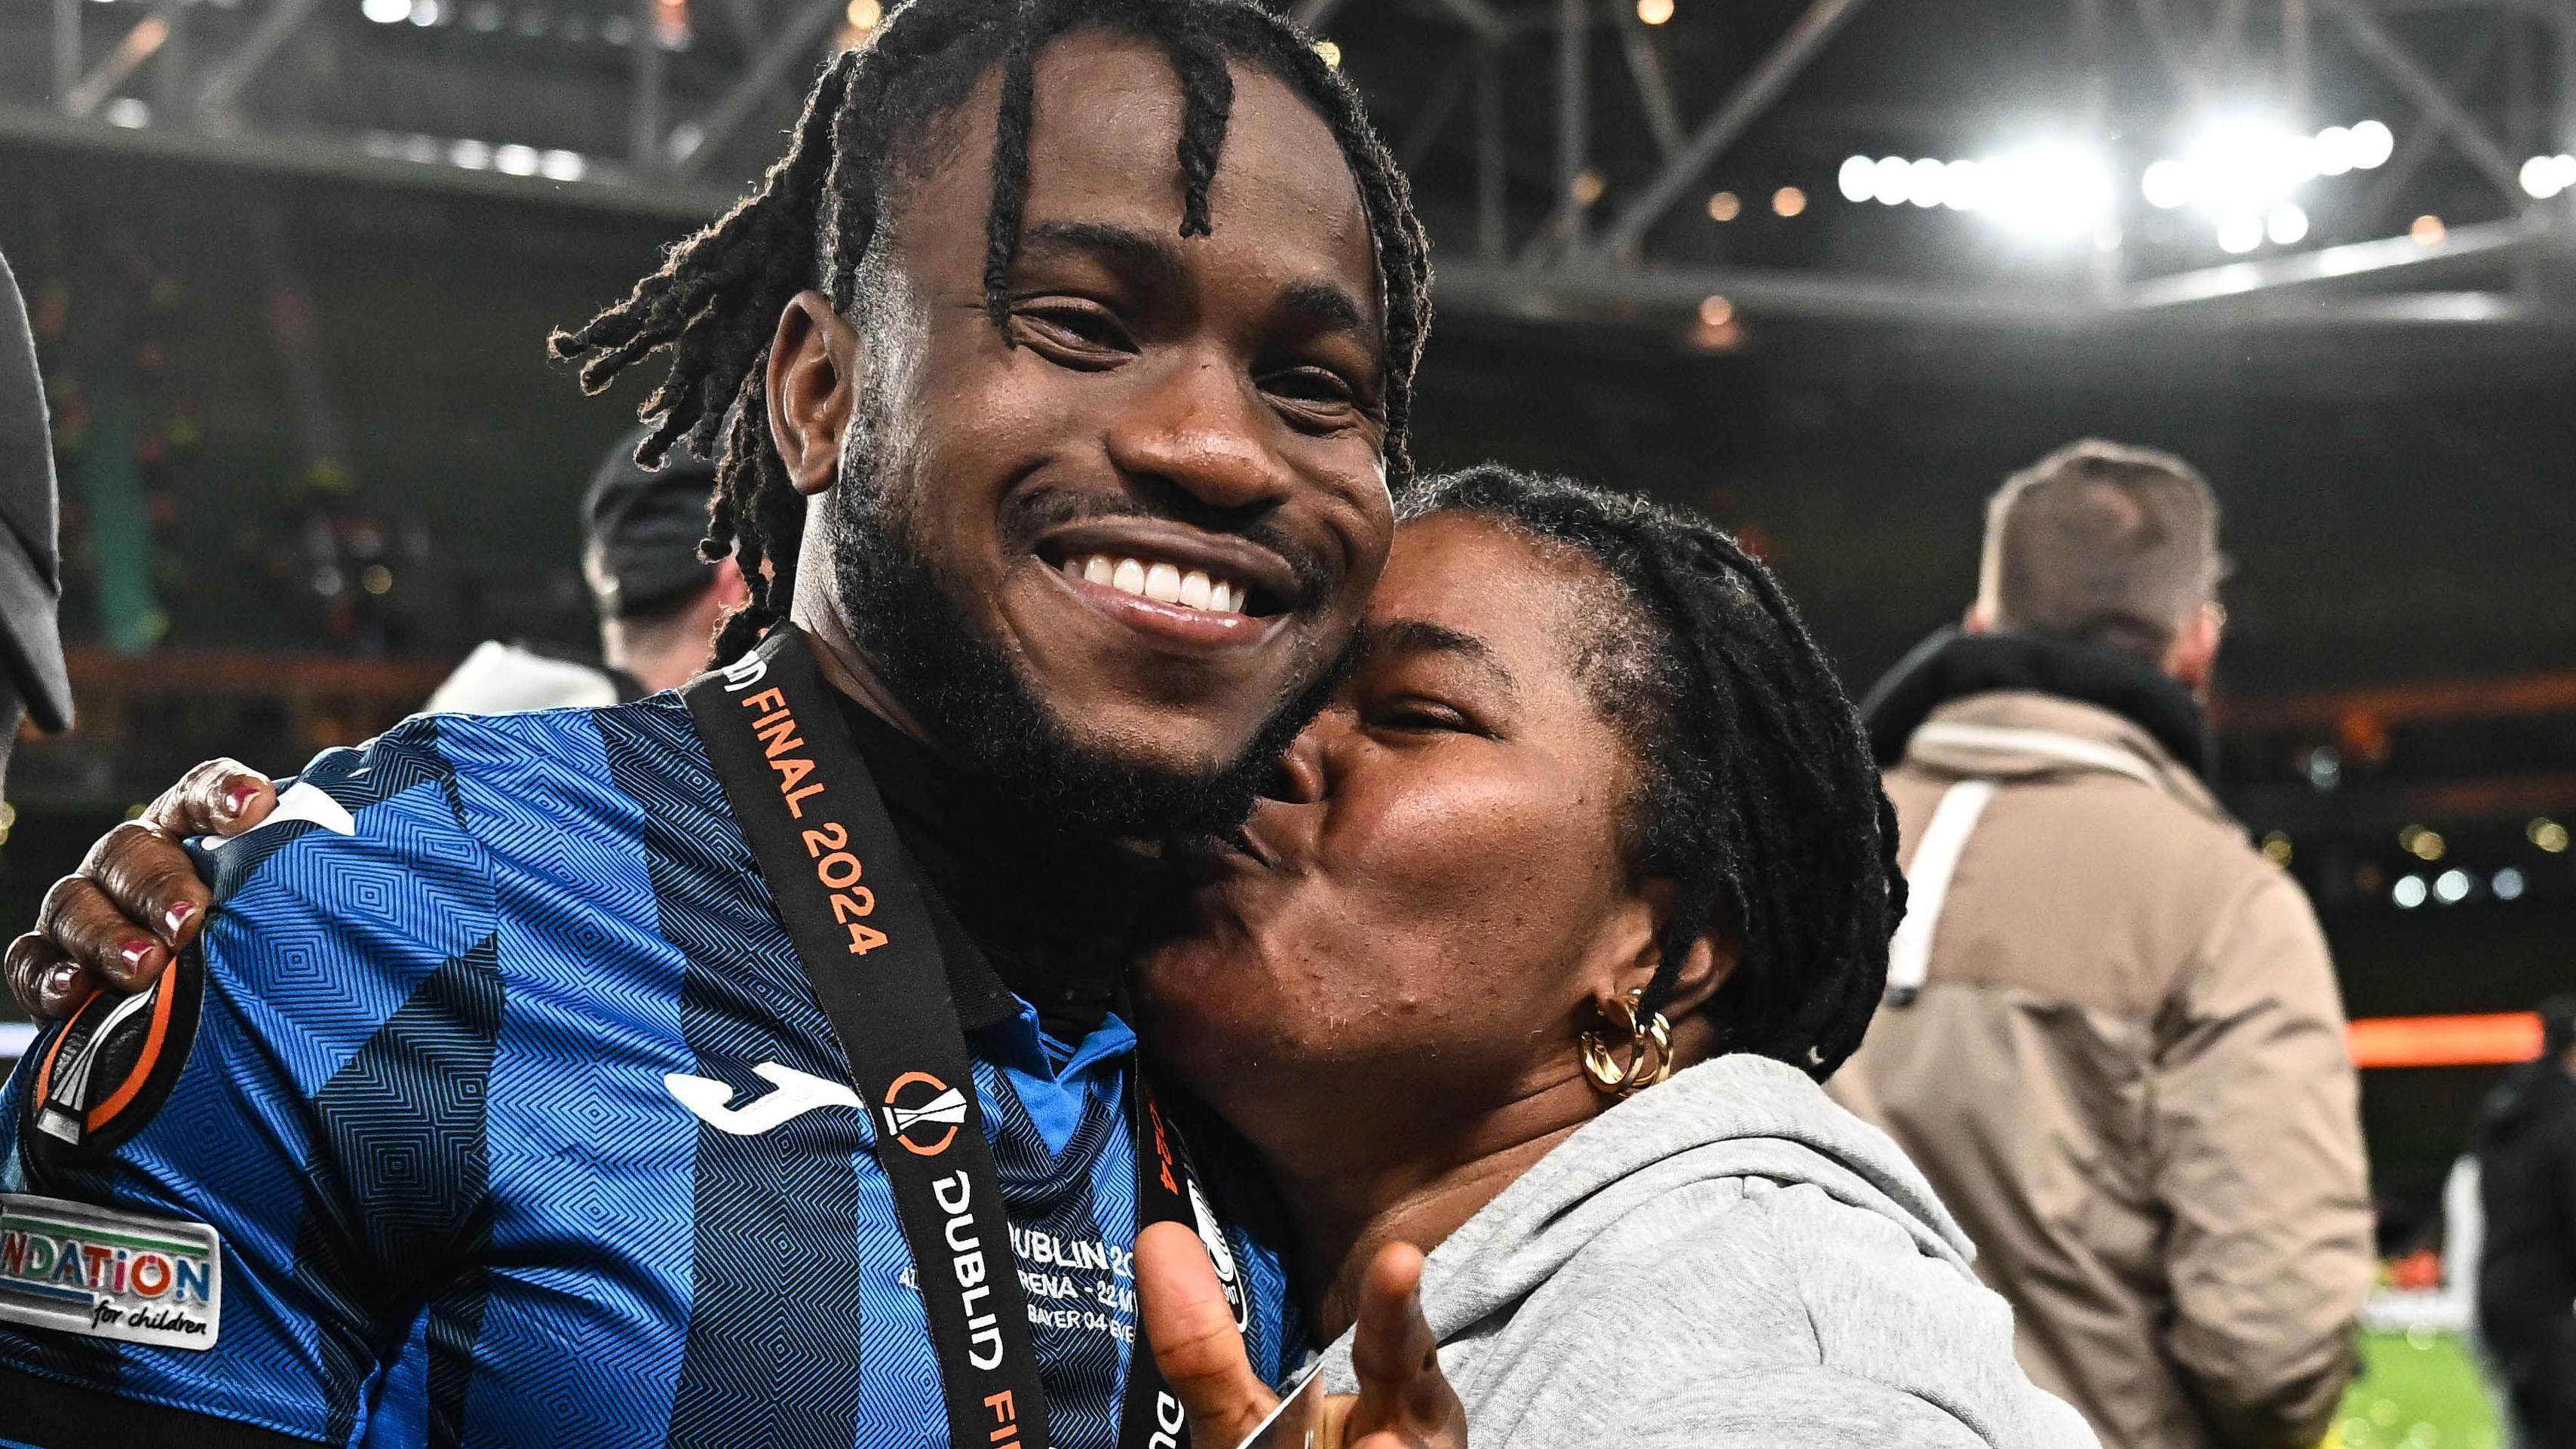 Ademola Lookman celebrates with his family after winning the Europa League title with Atalanta